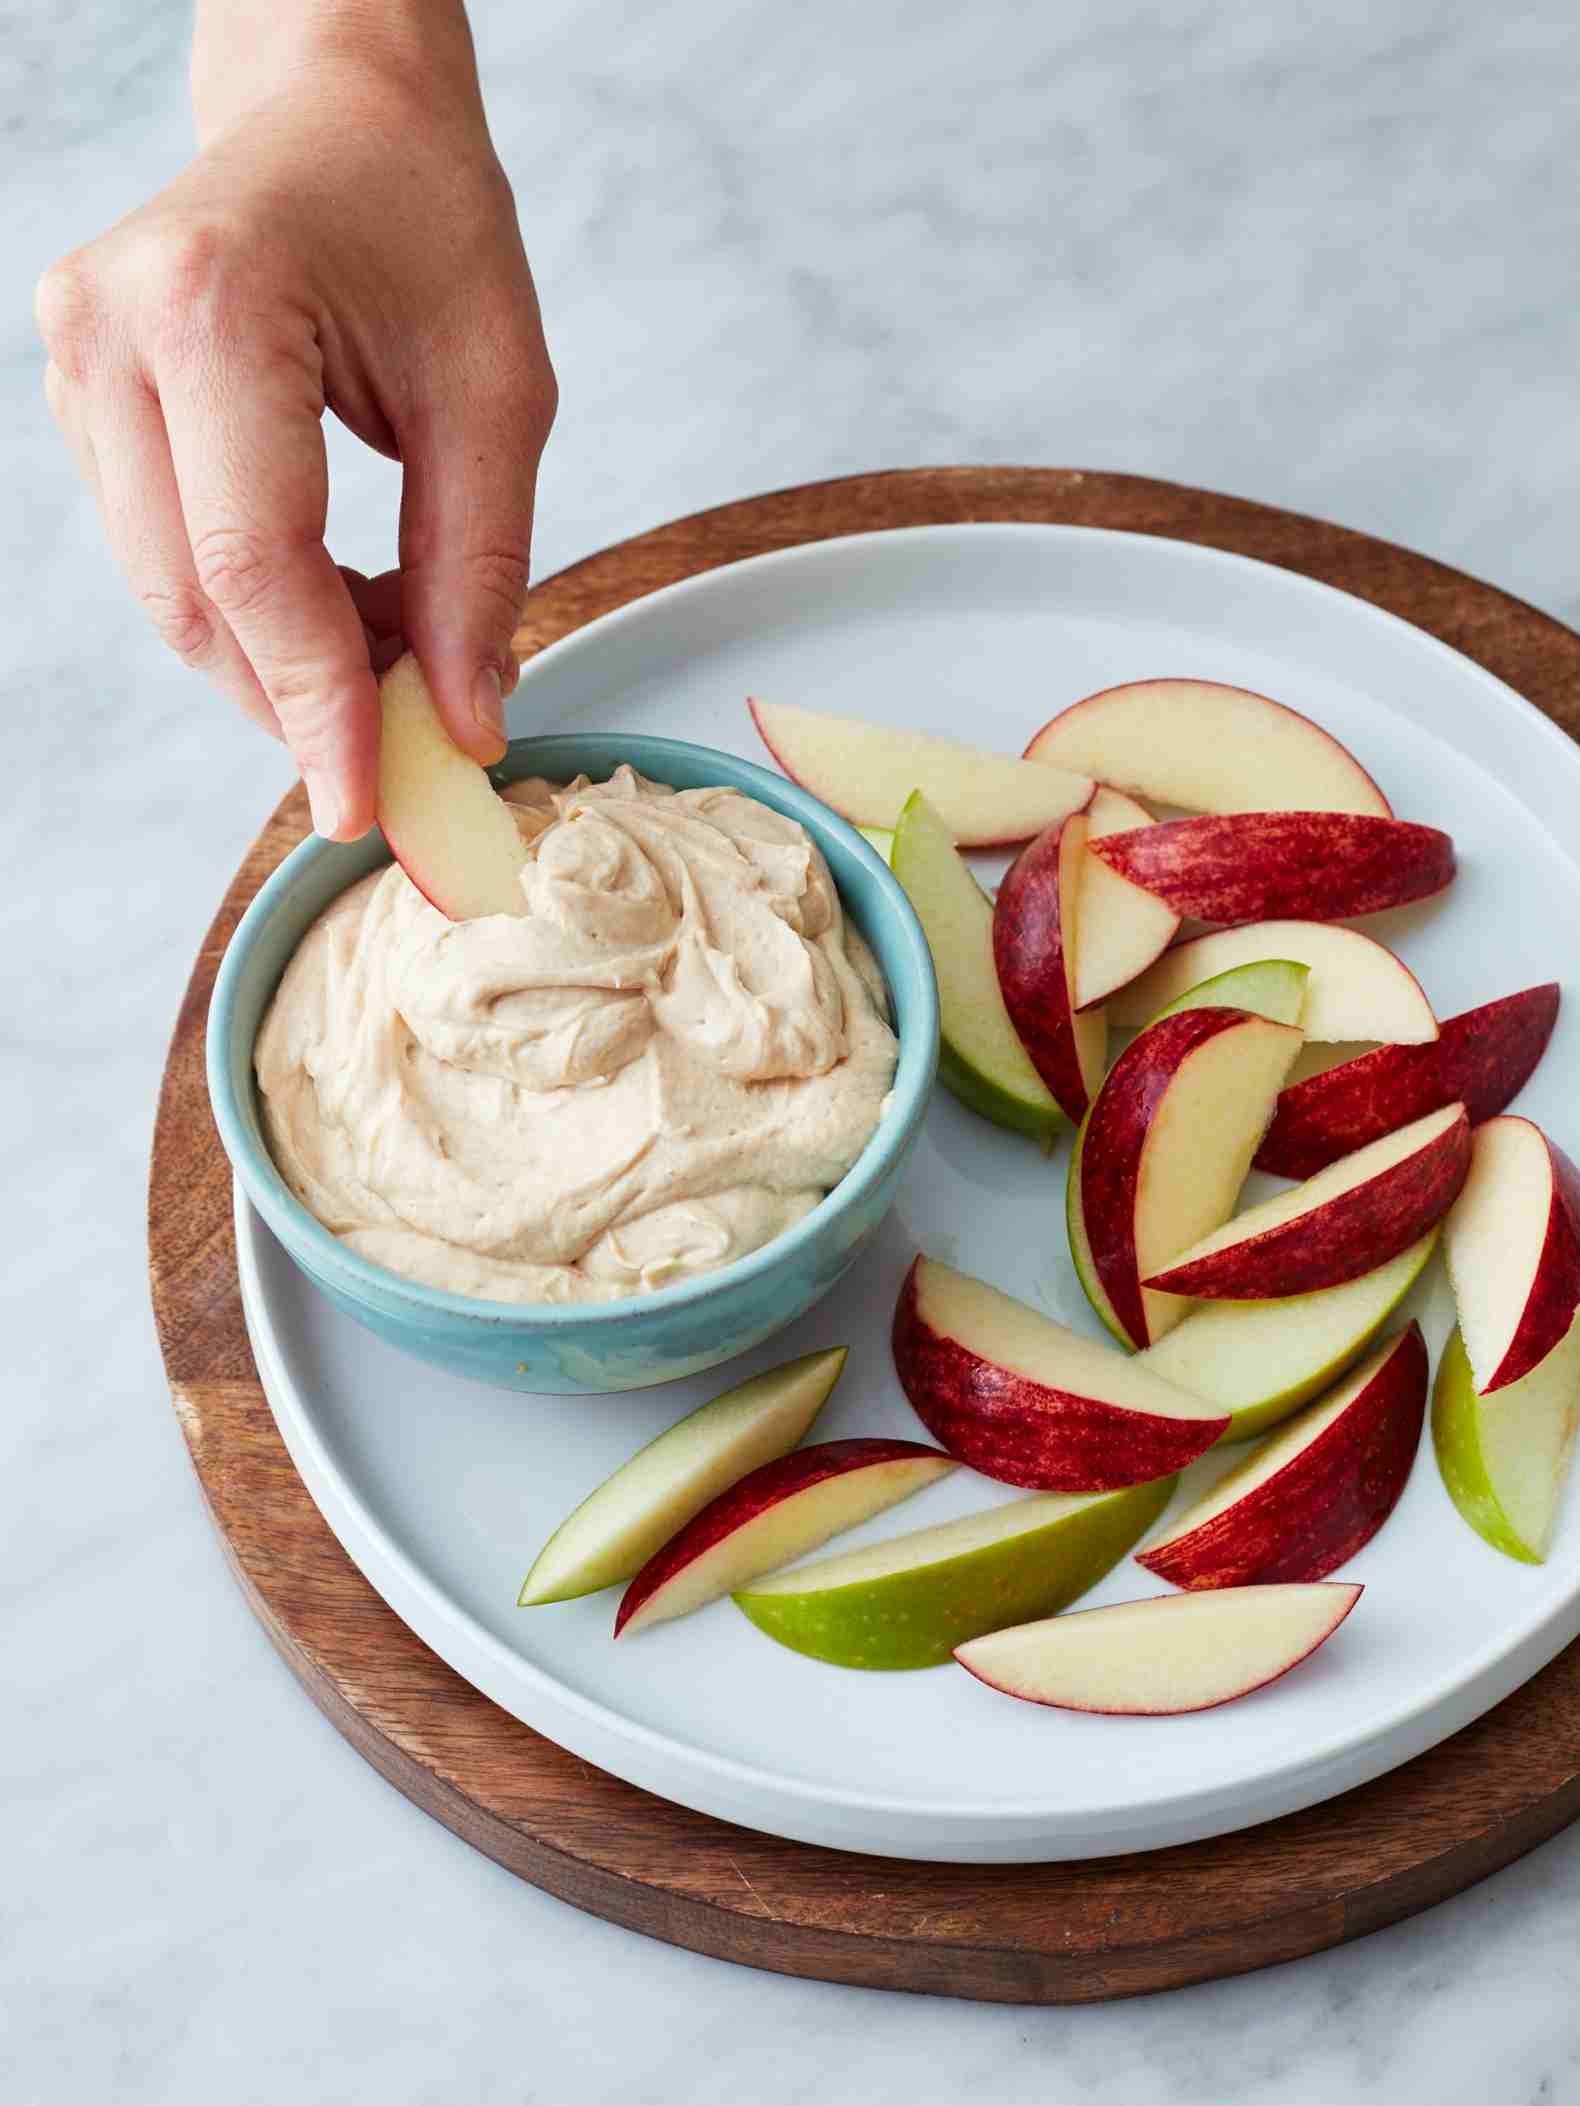 Peanut butter with these healthy snacks to take away apple apple with dip